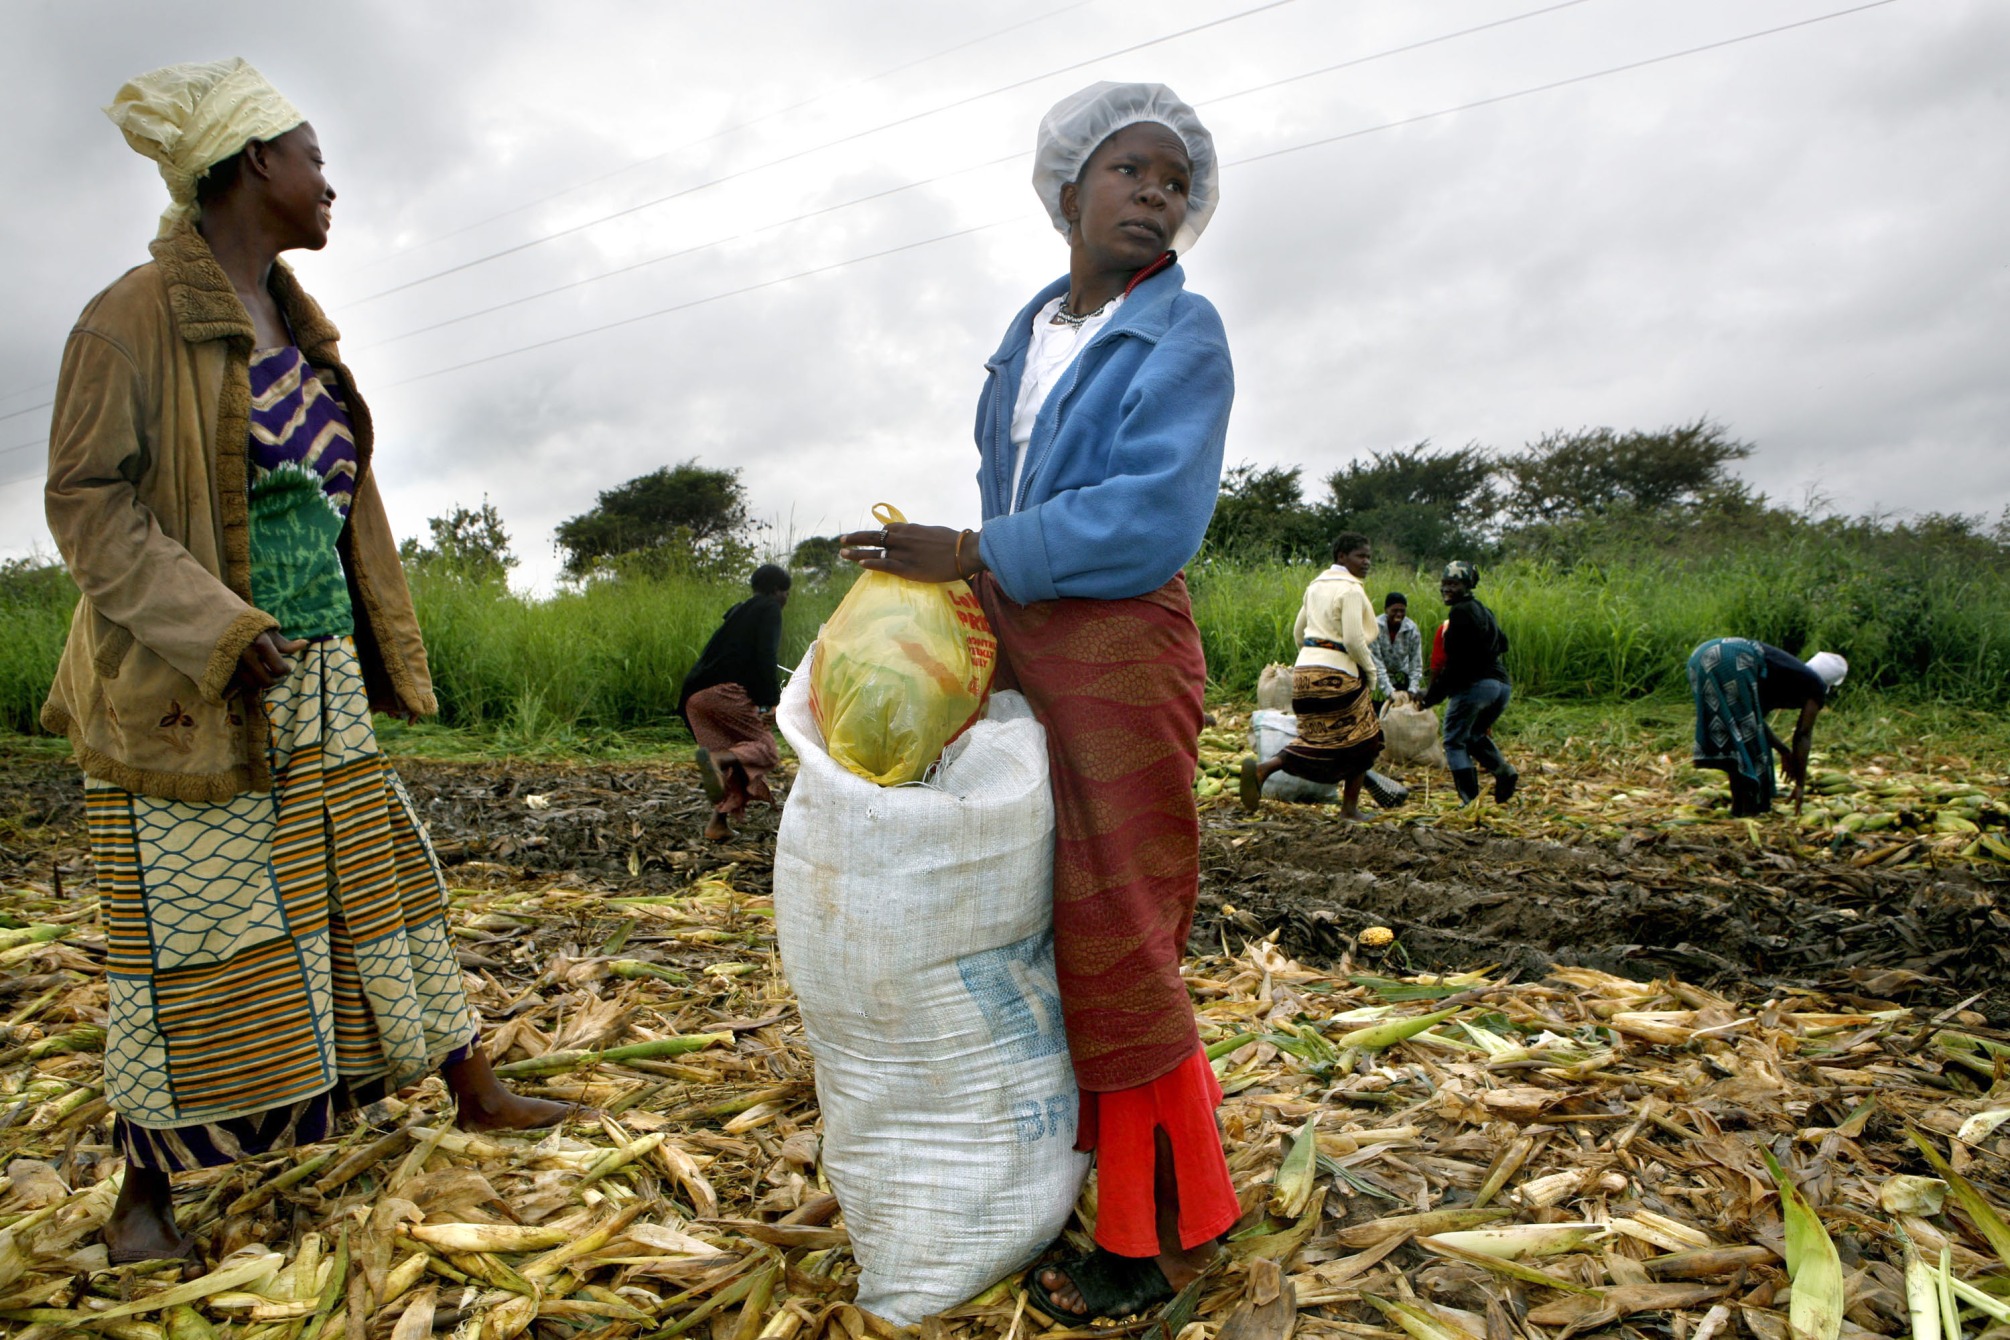 Workers pack corn into bags on a farm on the outskirts of Lusaka, Zambia.